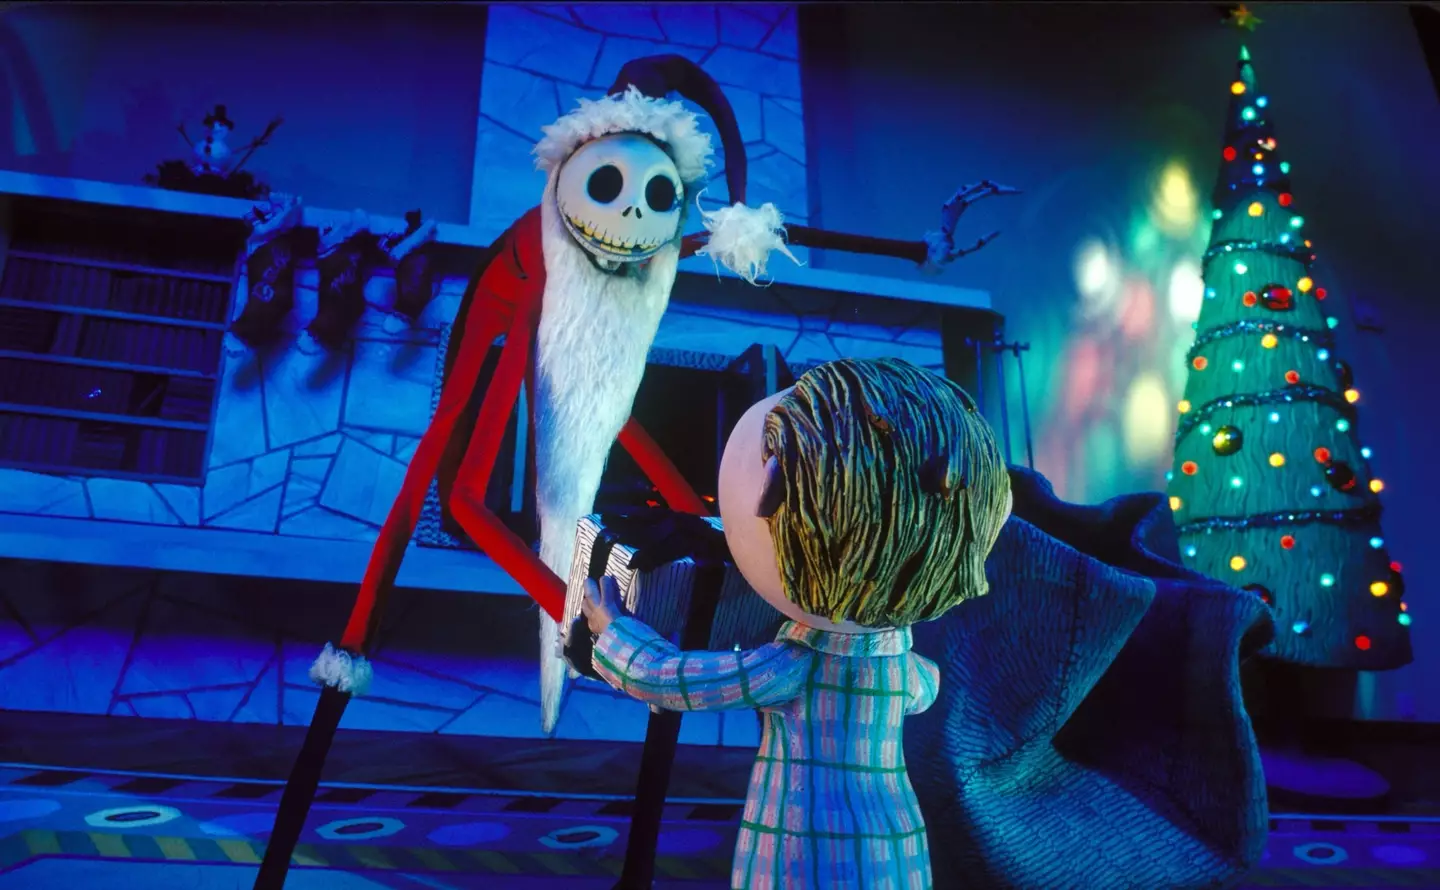 The Nightmare Before Christmas has become a cult classic.